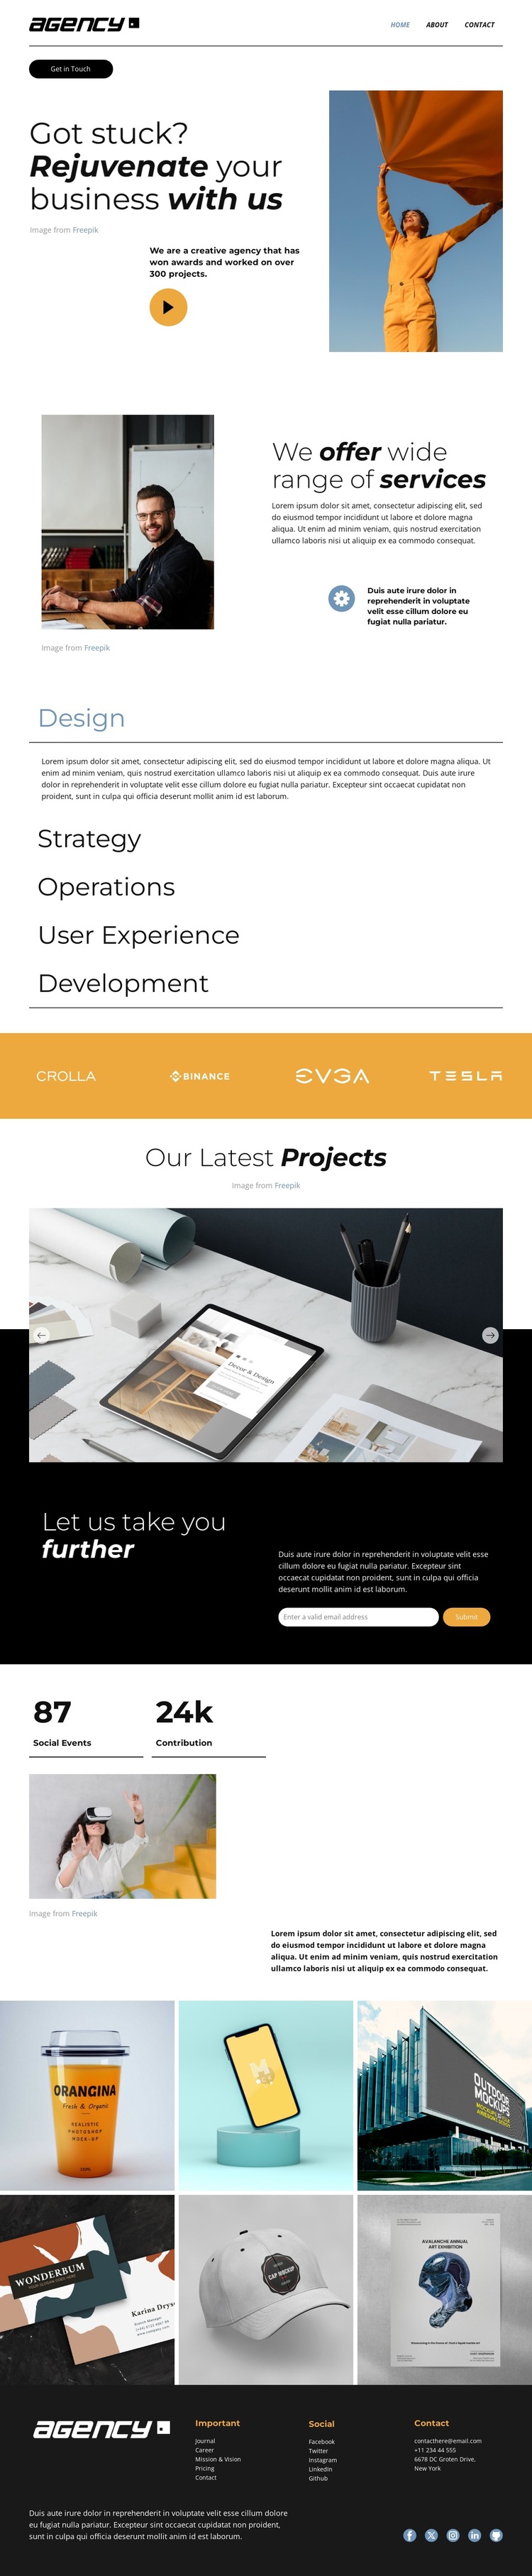 Scale to greater success HTML5 Template